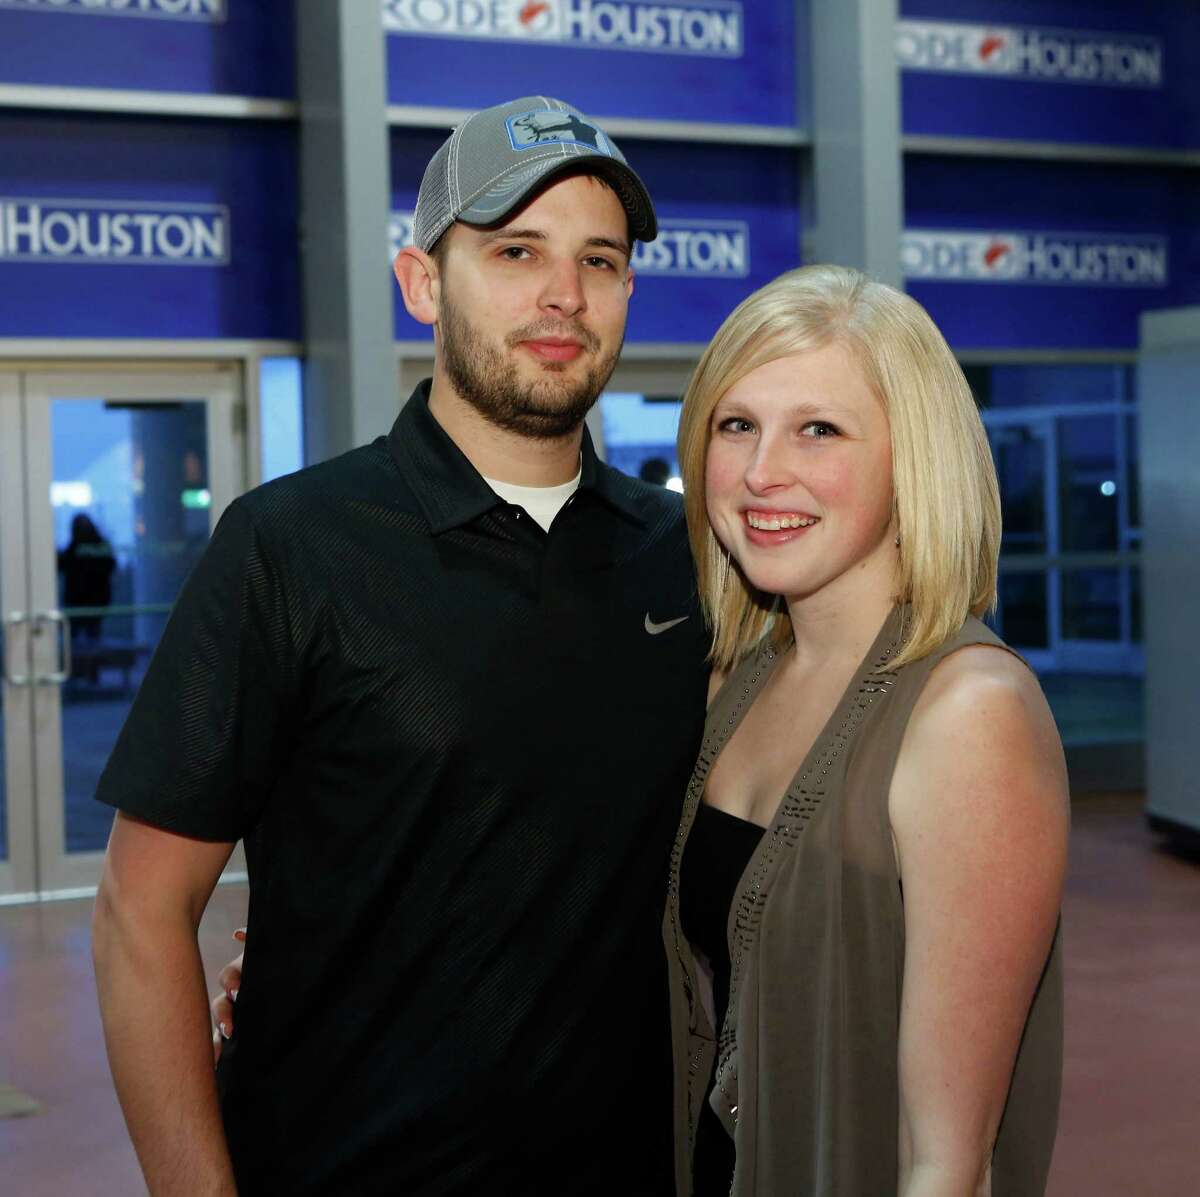 Fans at Brantley Gilbert's RodeoHouston concert on March 11.